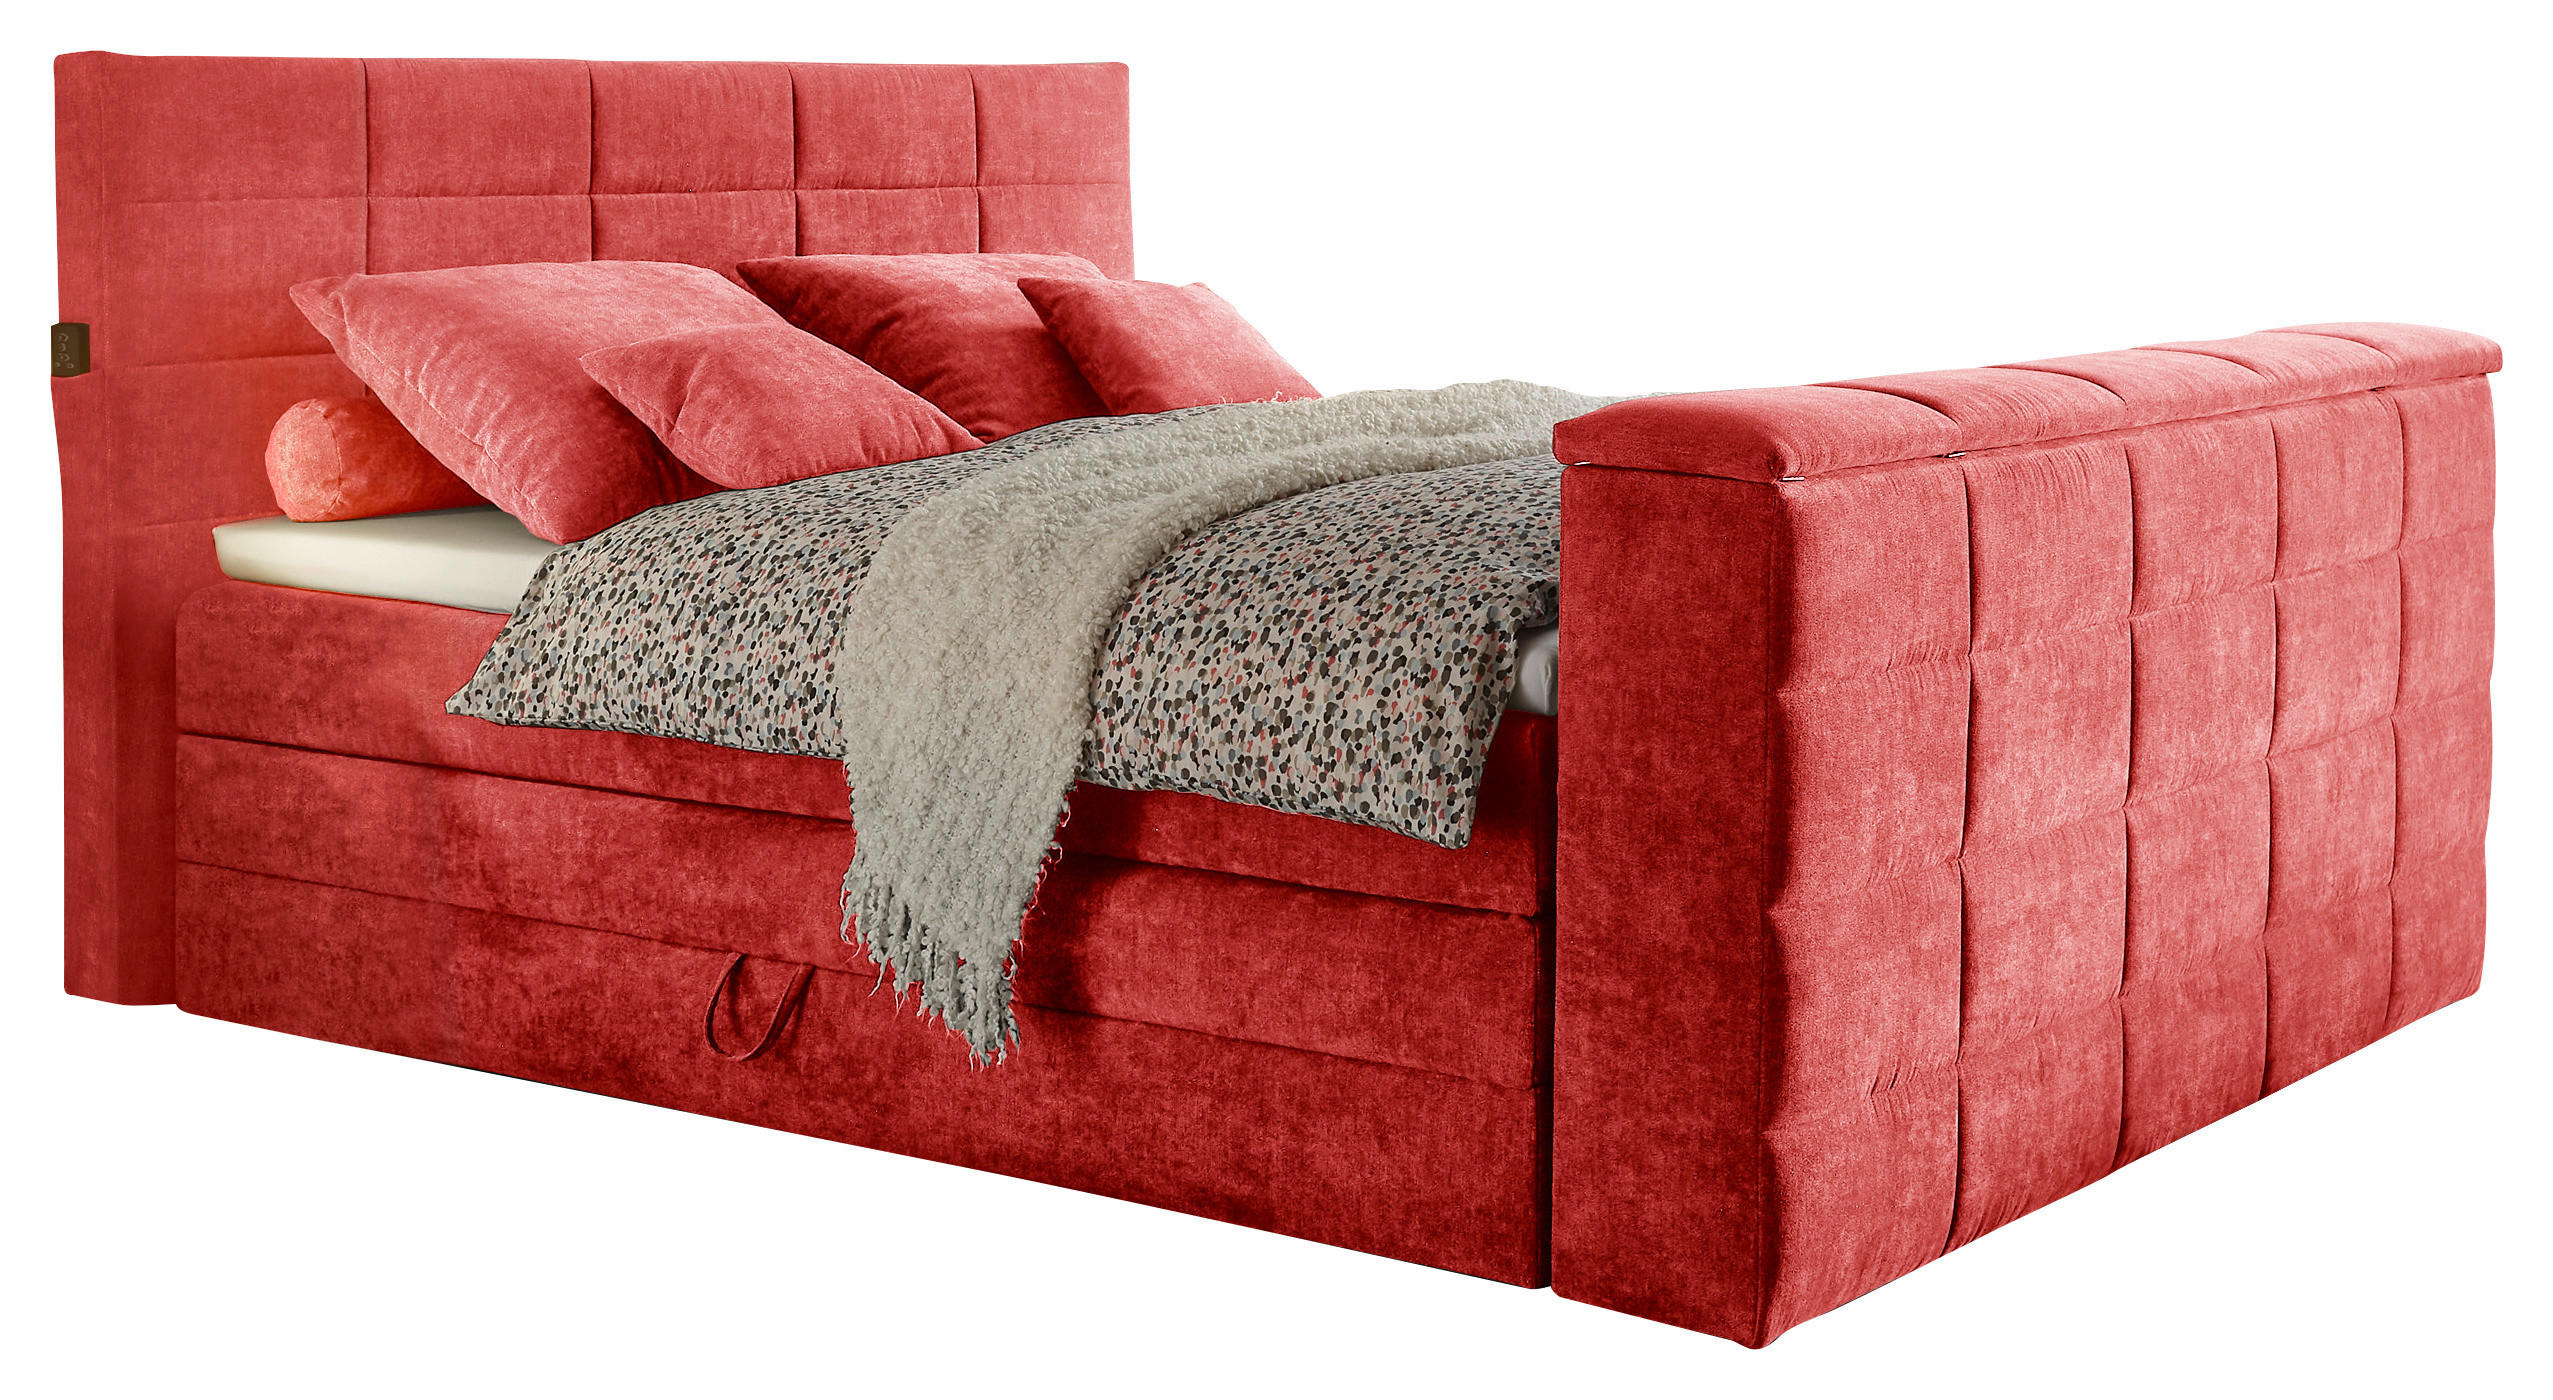 BOXSPRINGBETT 180/200 cm  in Rot  - Rot, KONVENTIONELL, Textil (180/200cm) - Carryhome